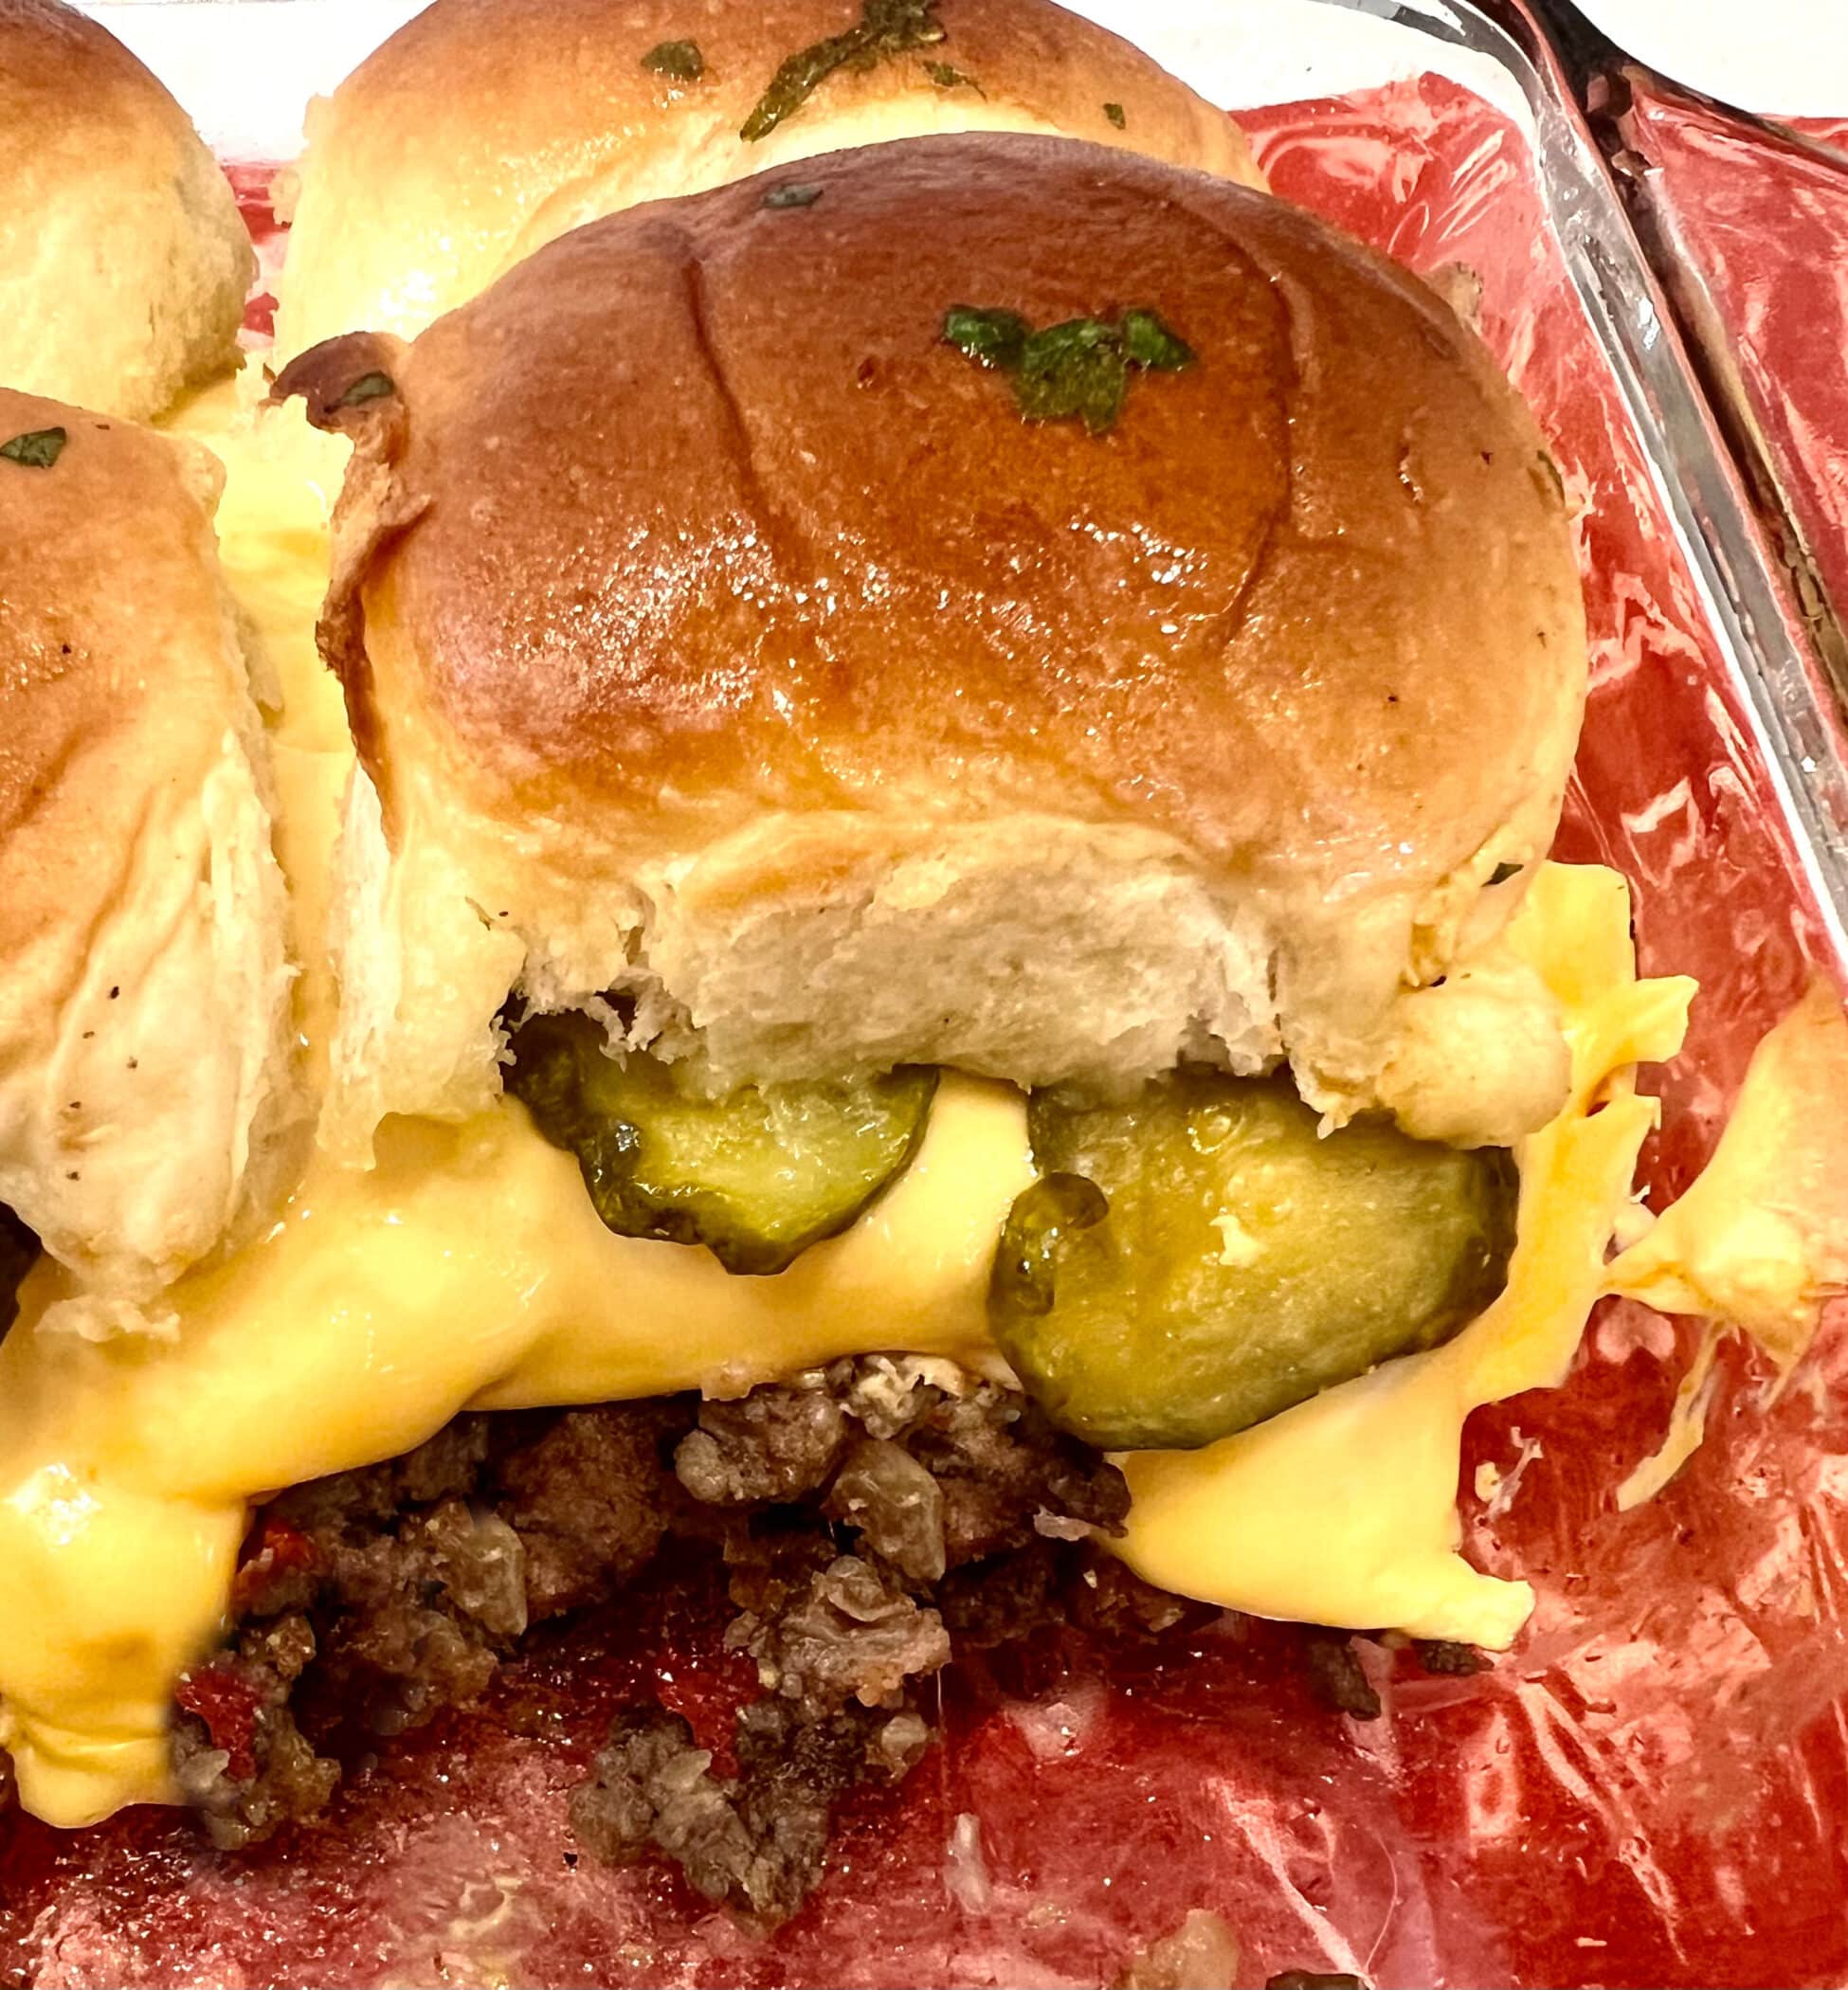 one slider with ground beef and pickles